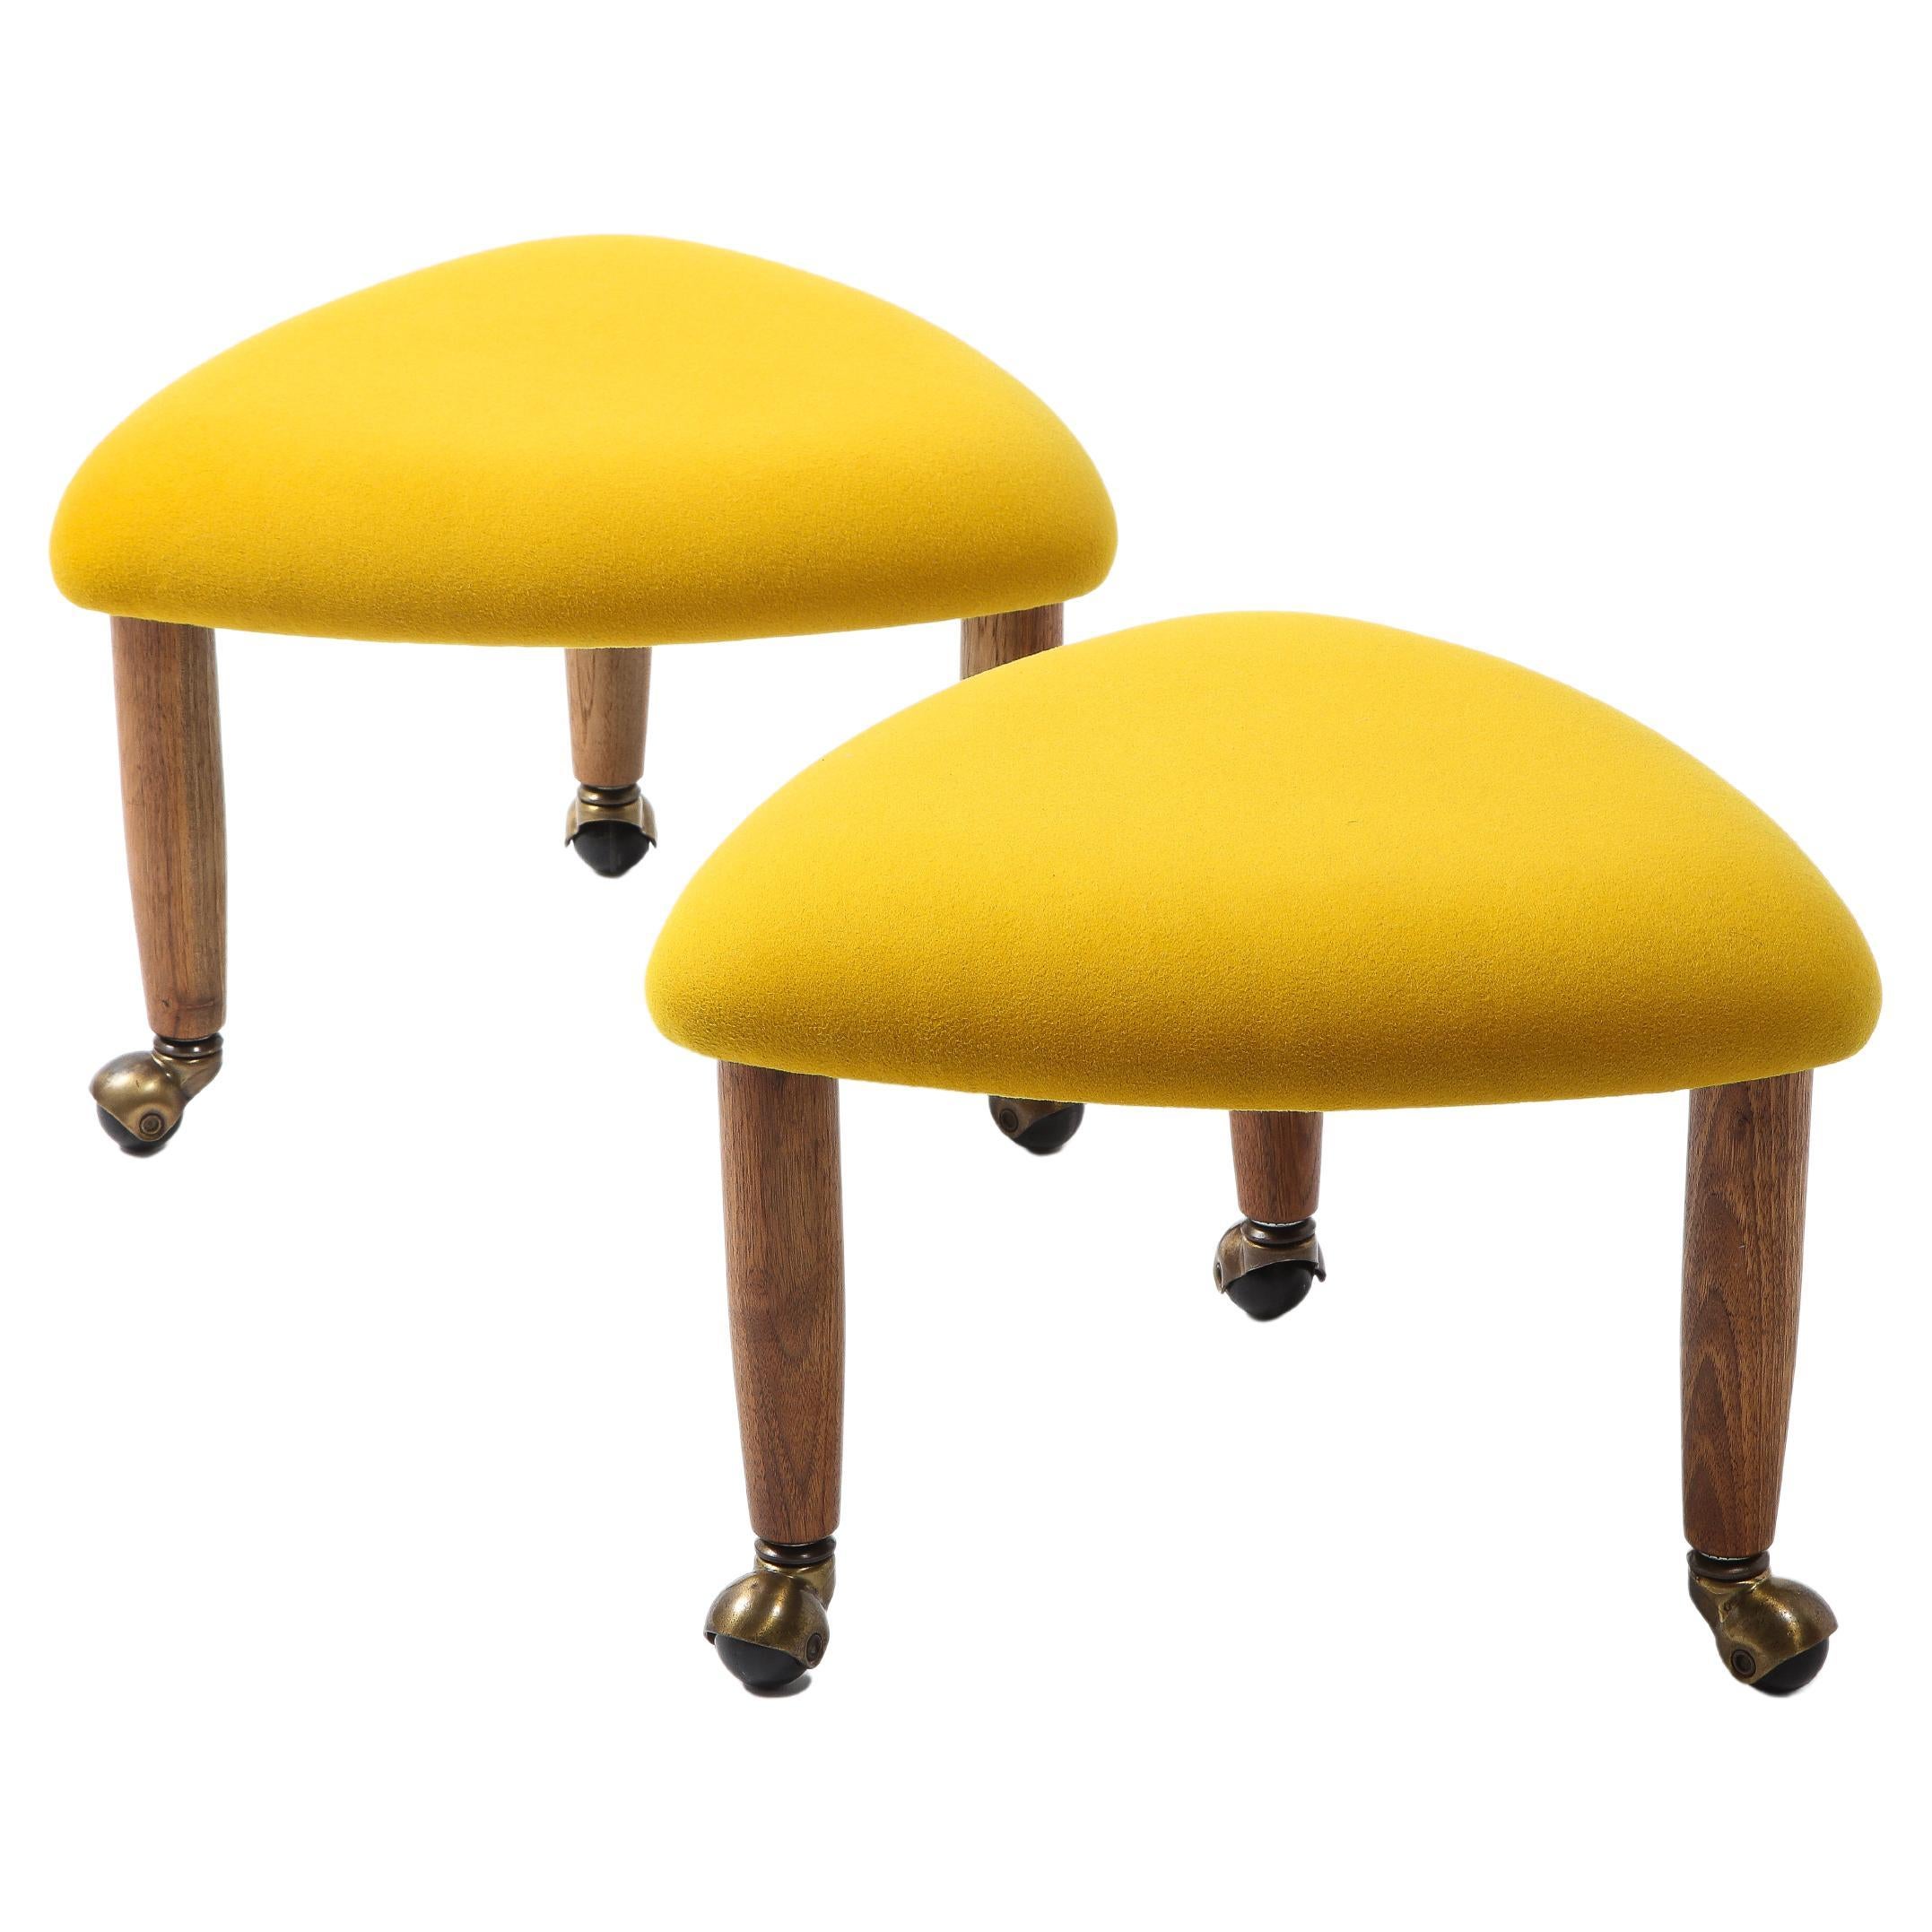 Adrian Pearsal Pair of Trifecta Stools on Castors in Yellow Cashmere, USA 1960's For Sale